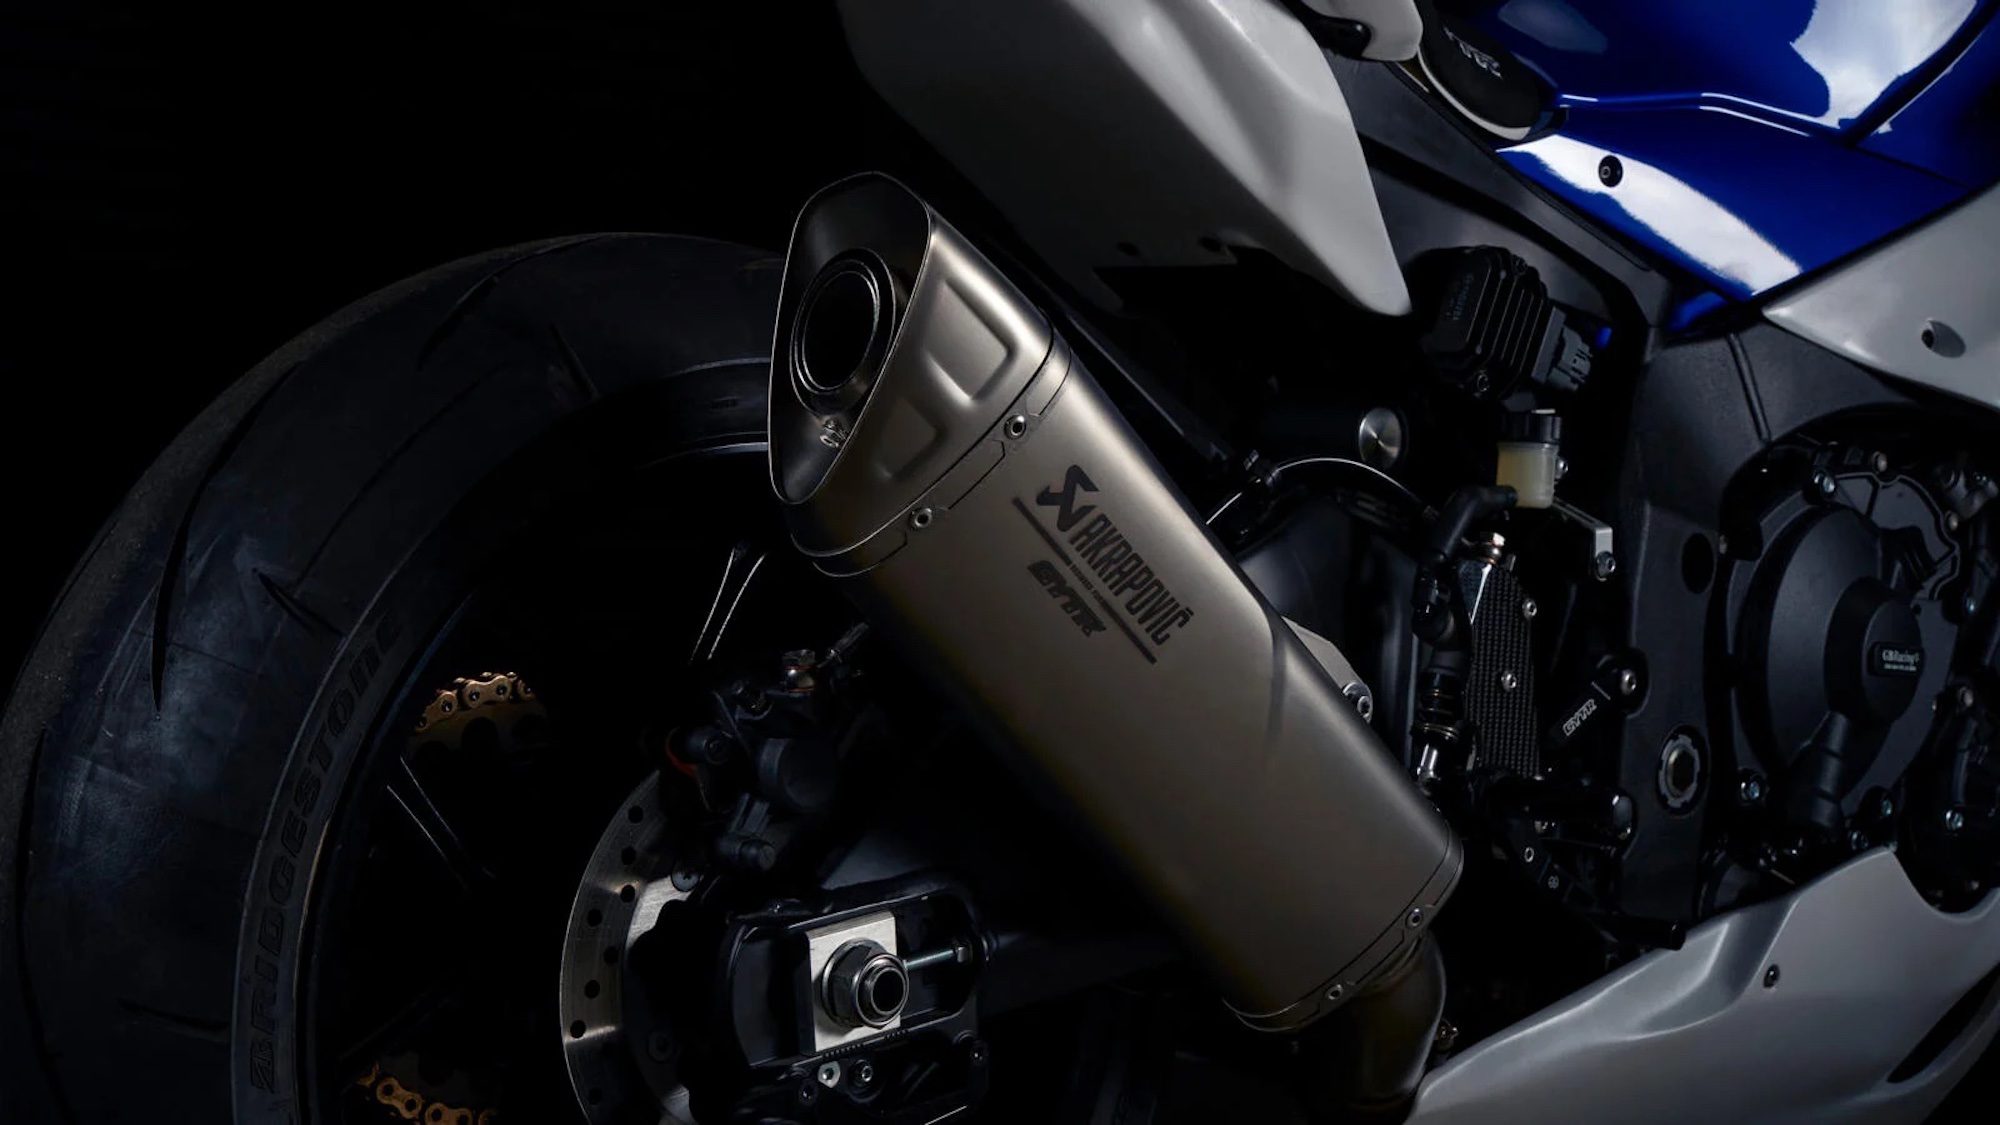 Yamaha's new machine: A track-only YZF-R1 GYTR and GYTRPro. Media sourced from MCN.